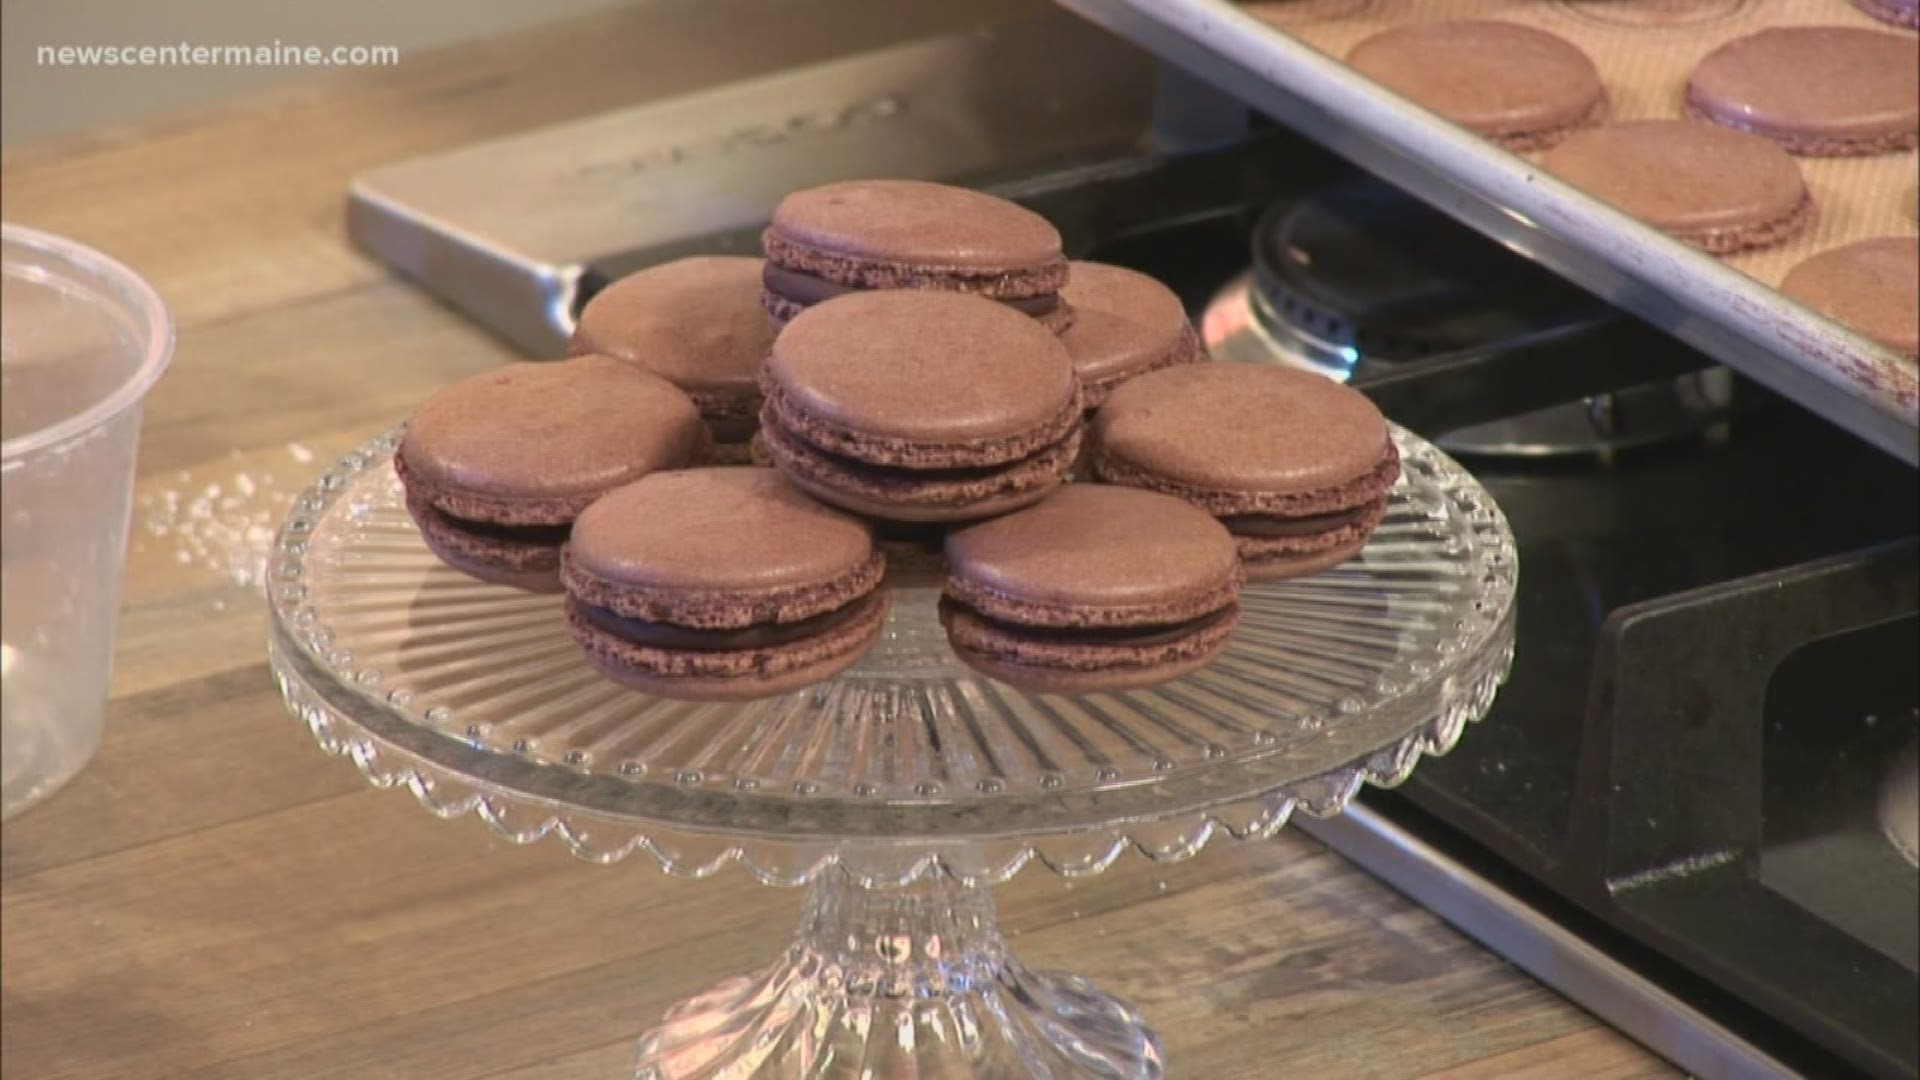 Want a dessert to impress your friends? Kristen Lawson Perry of the 1690 House Bakeshop + Cafe in Wells shows us how to make mouth-watering chocolate macarons.